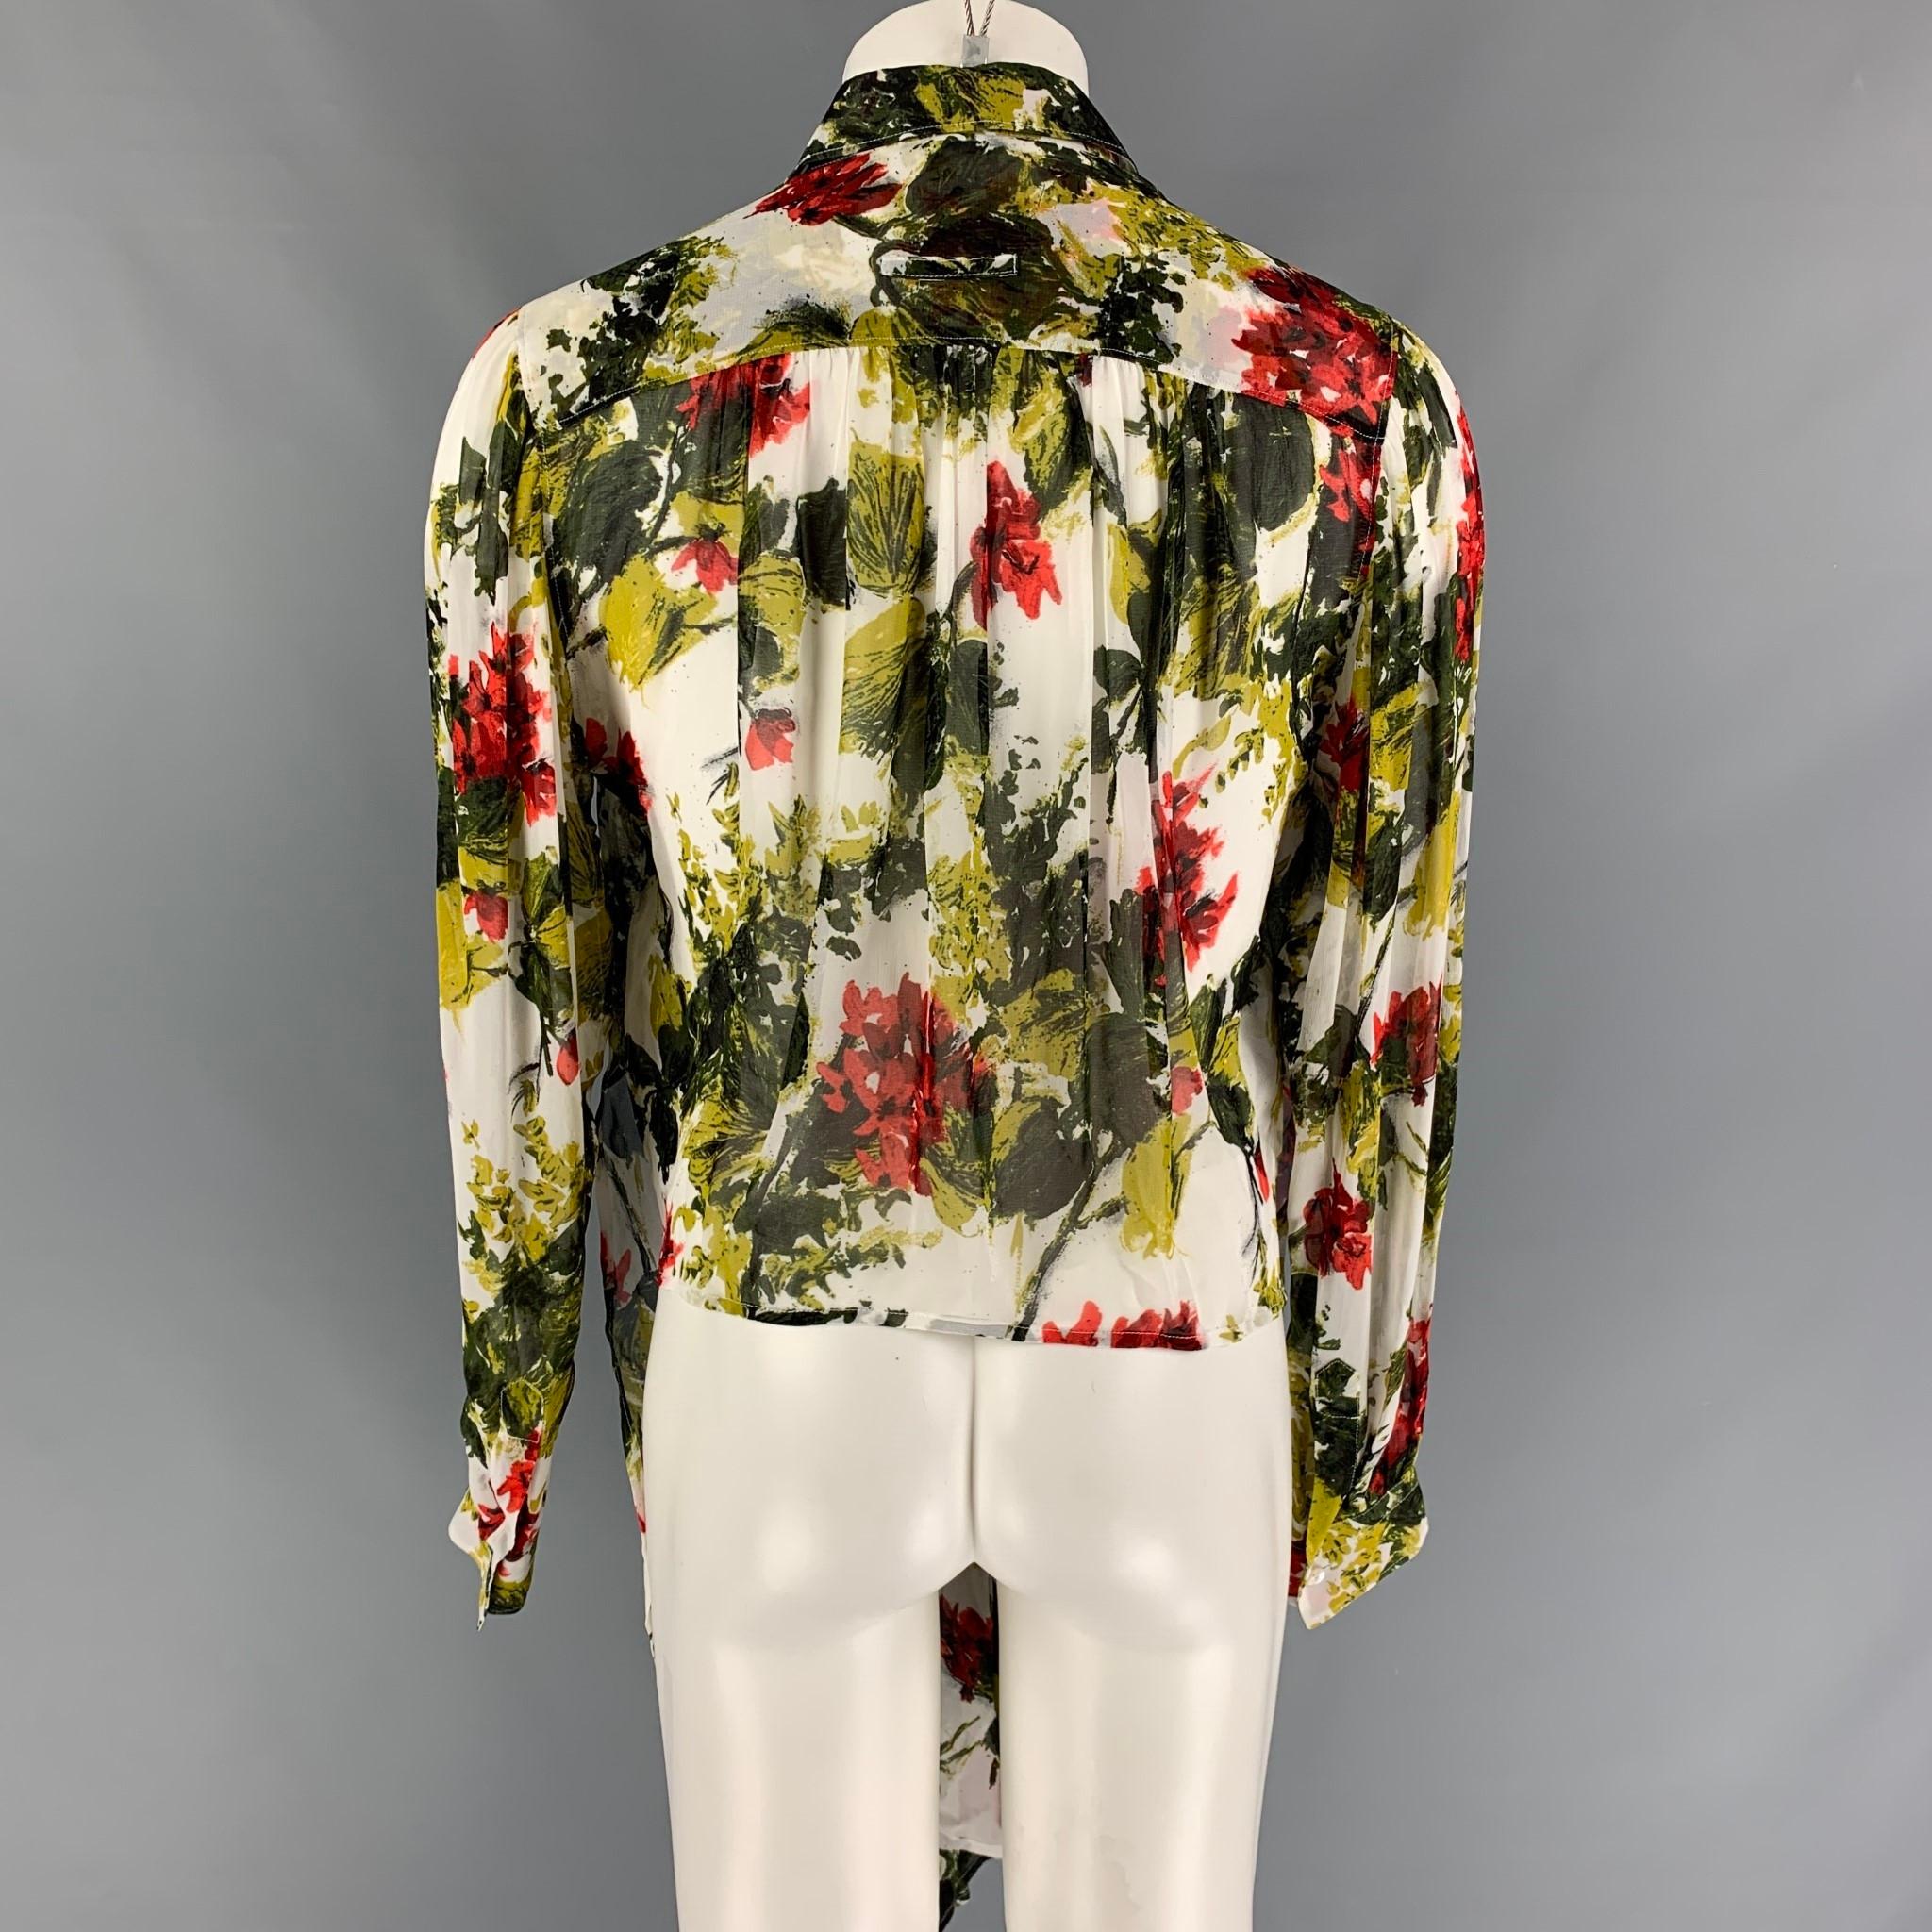 Gray JEAN PAUL GAULTIER Size XL Multi-Color Abstract Floral Long Sleeve Shirt